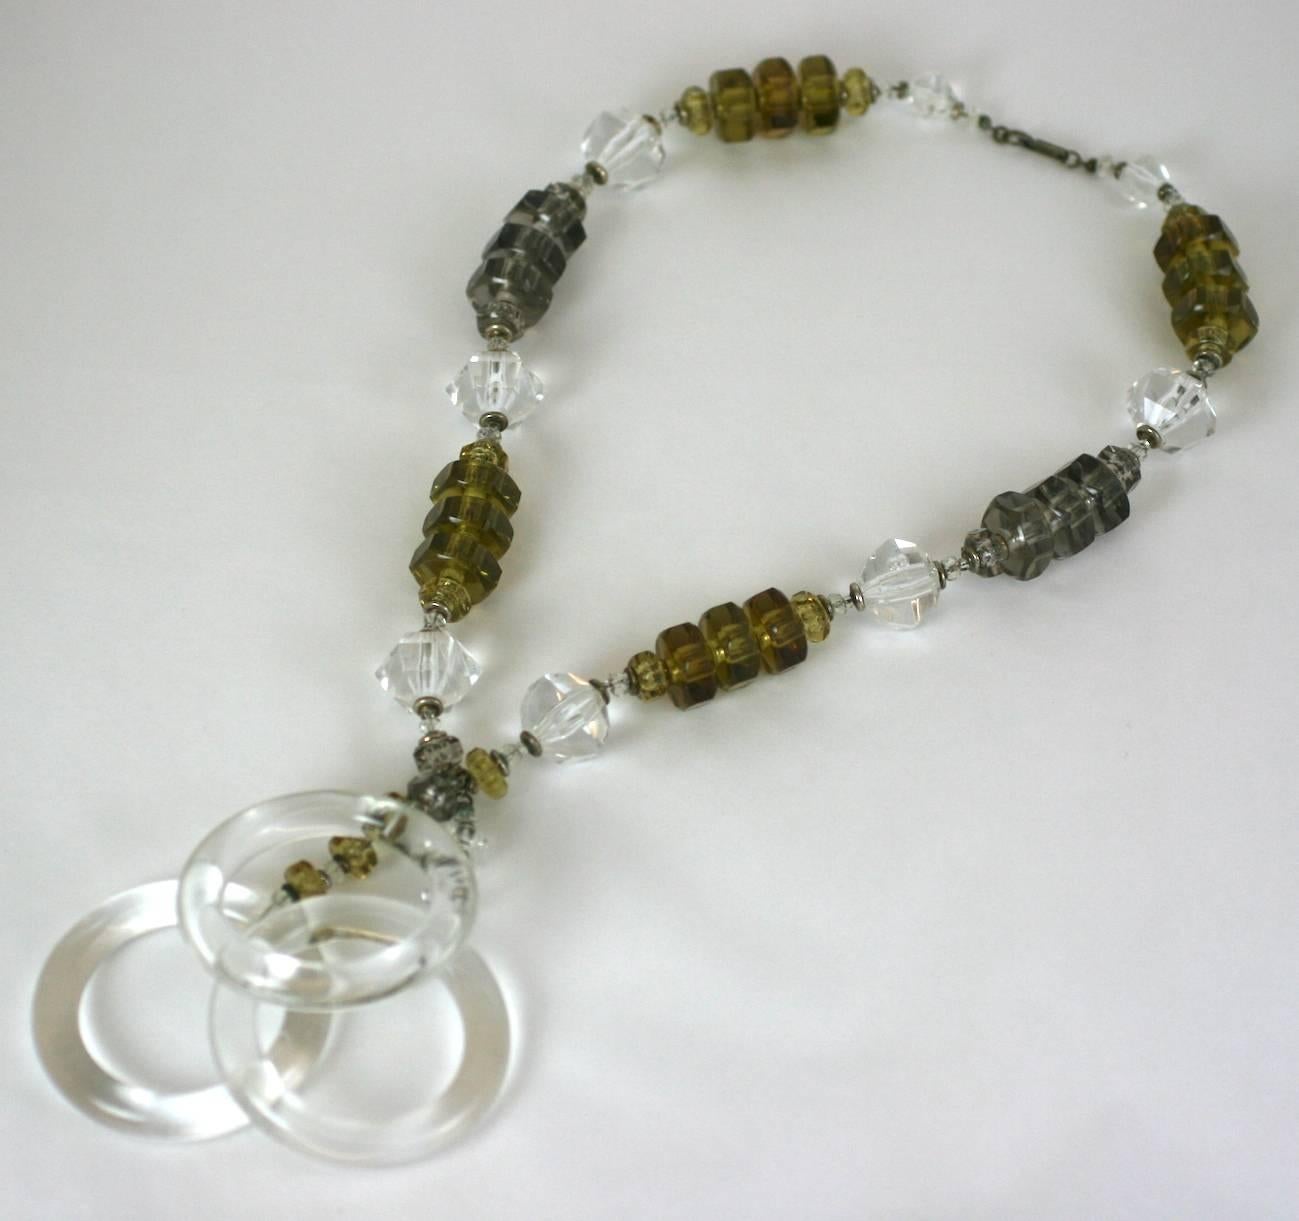 Miriam Haskell Multi Lucite Ring Pendant Necklace from the 1960's. Crystal lucite rings hang from a necklace composed of faceted lucite beads in smoke, crystal and olive. 1960's USA.
Excellent condition.
Necklace measures 22